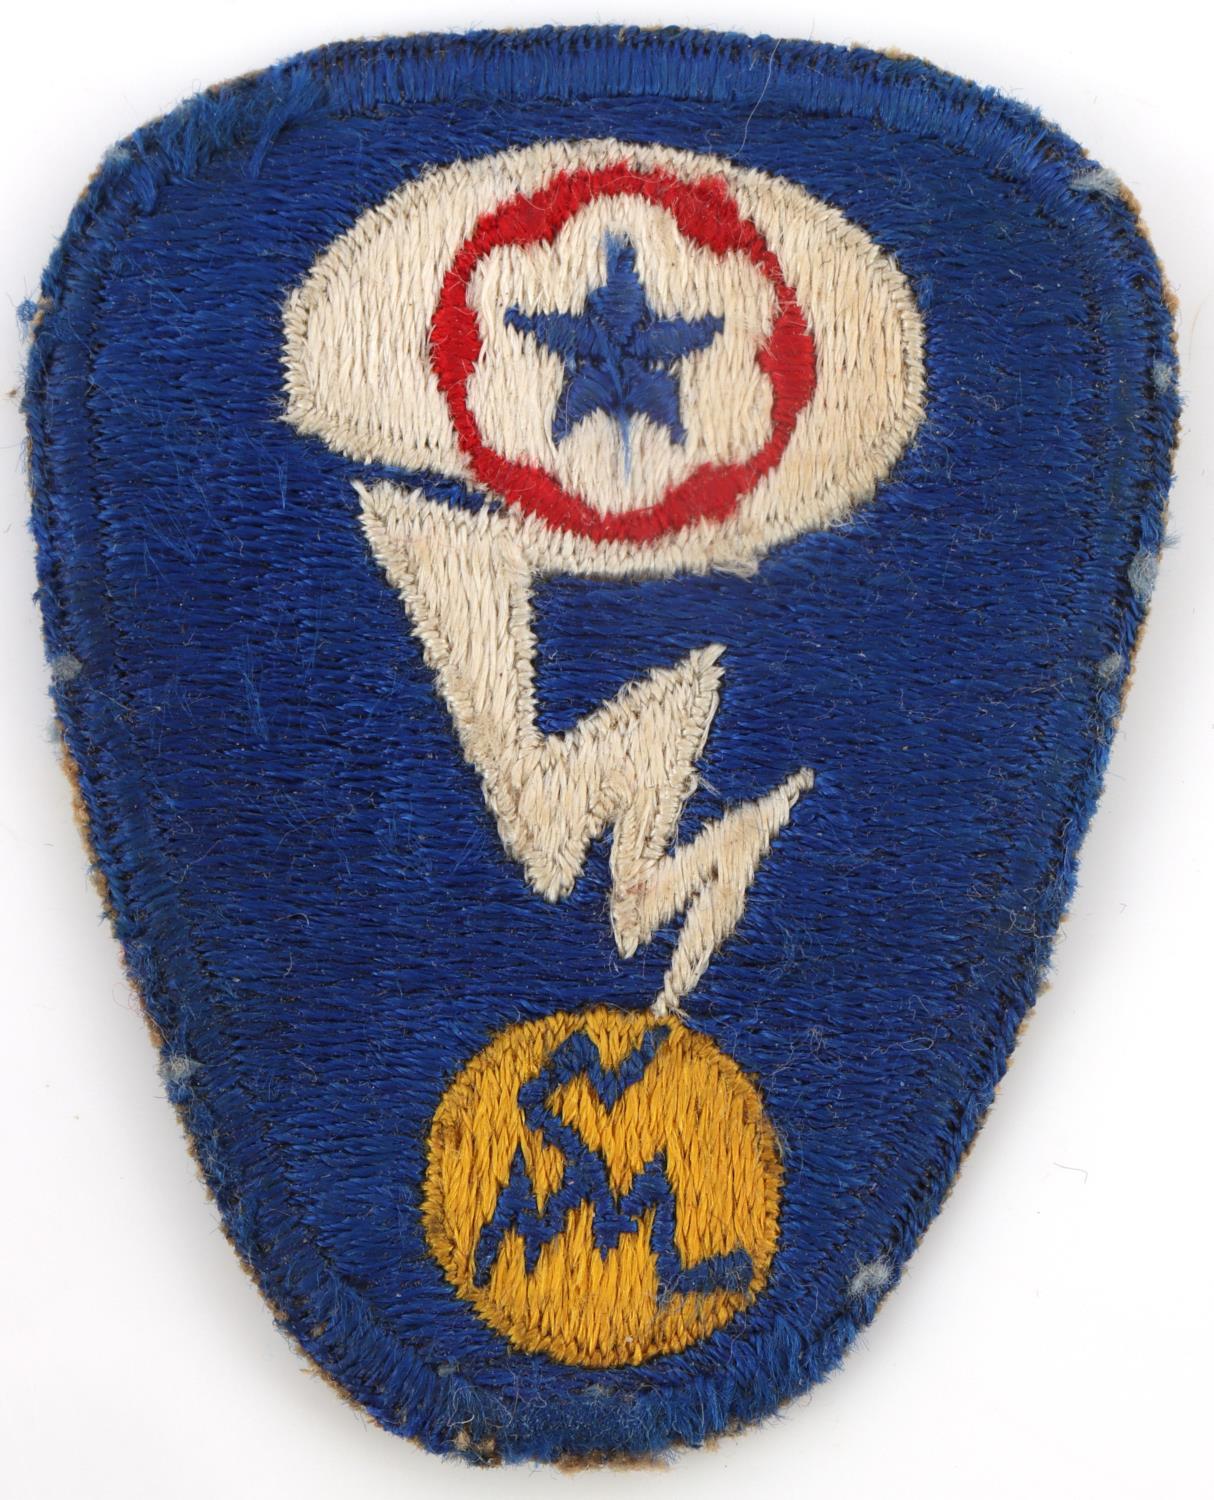 MANHATTAN PROJECT NAMED WWII PATCH